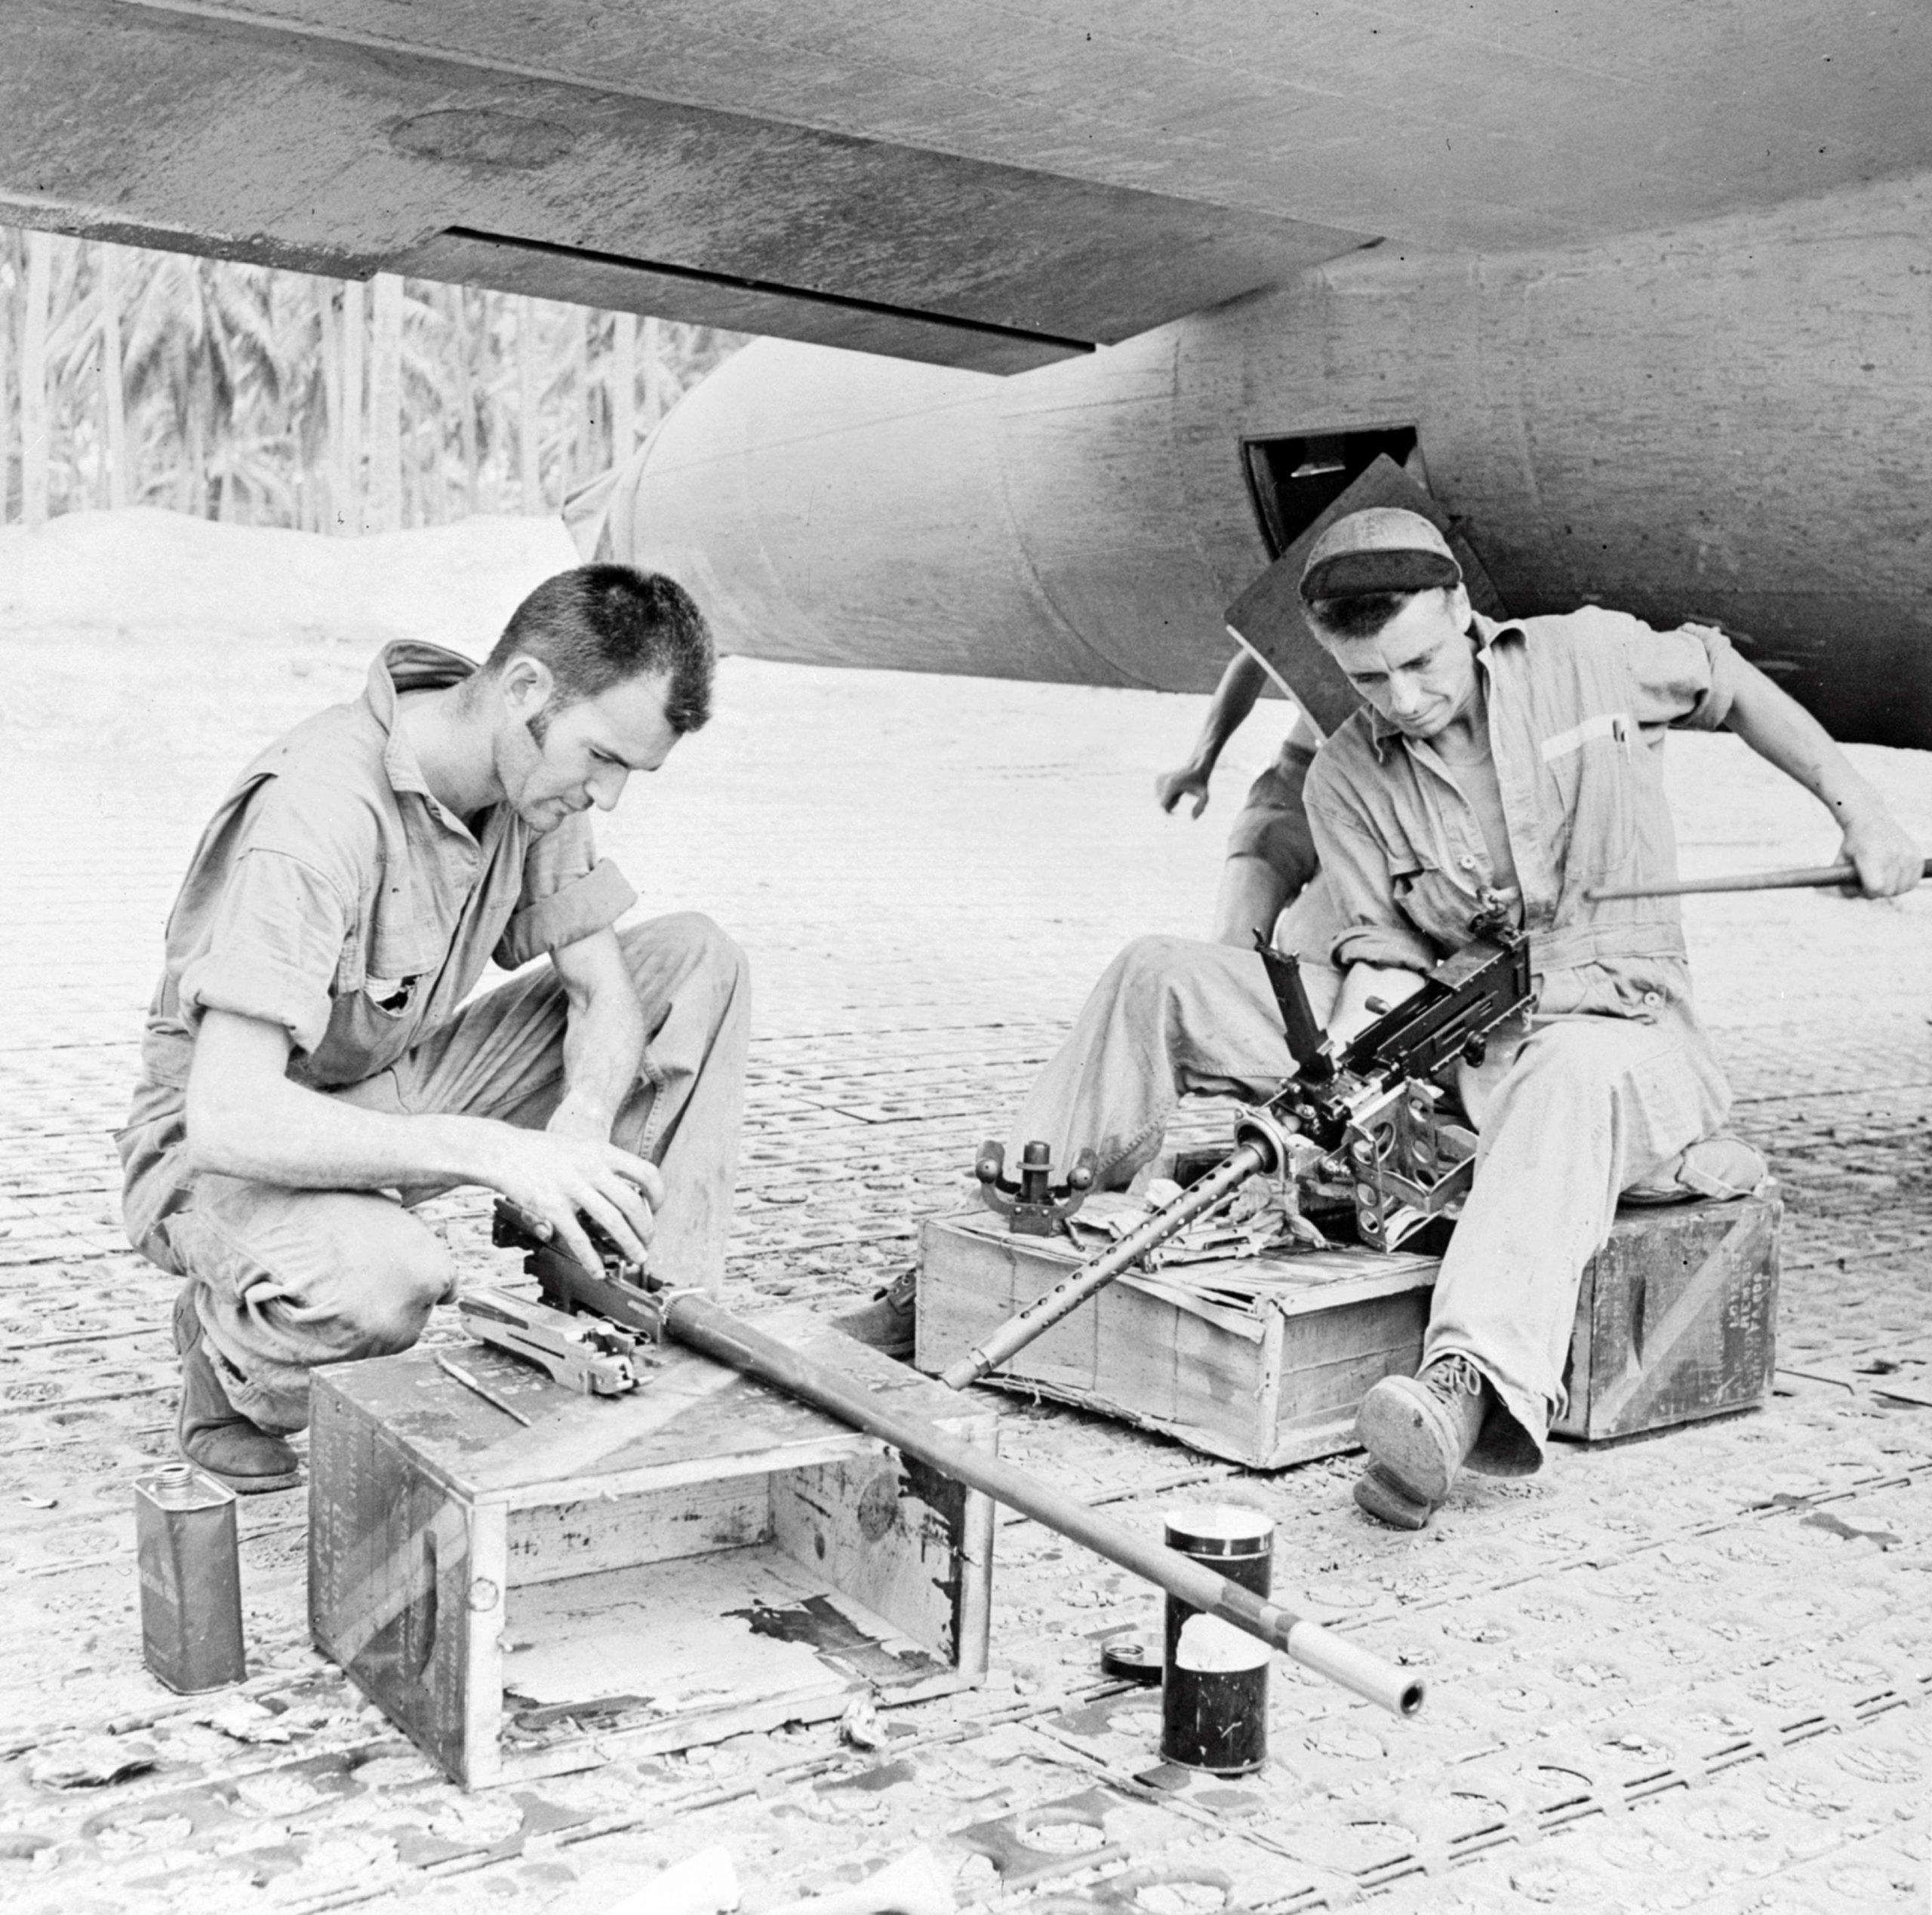 Gunners of the American B-17 bomber Sergeant Edward T. Spetch and Sergeant Vernon Nelson